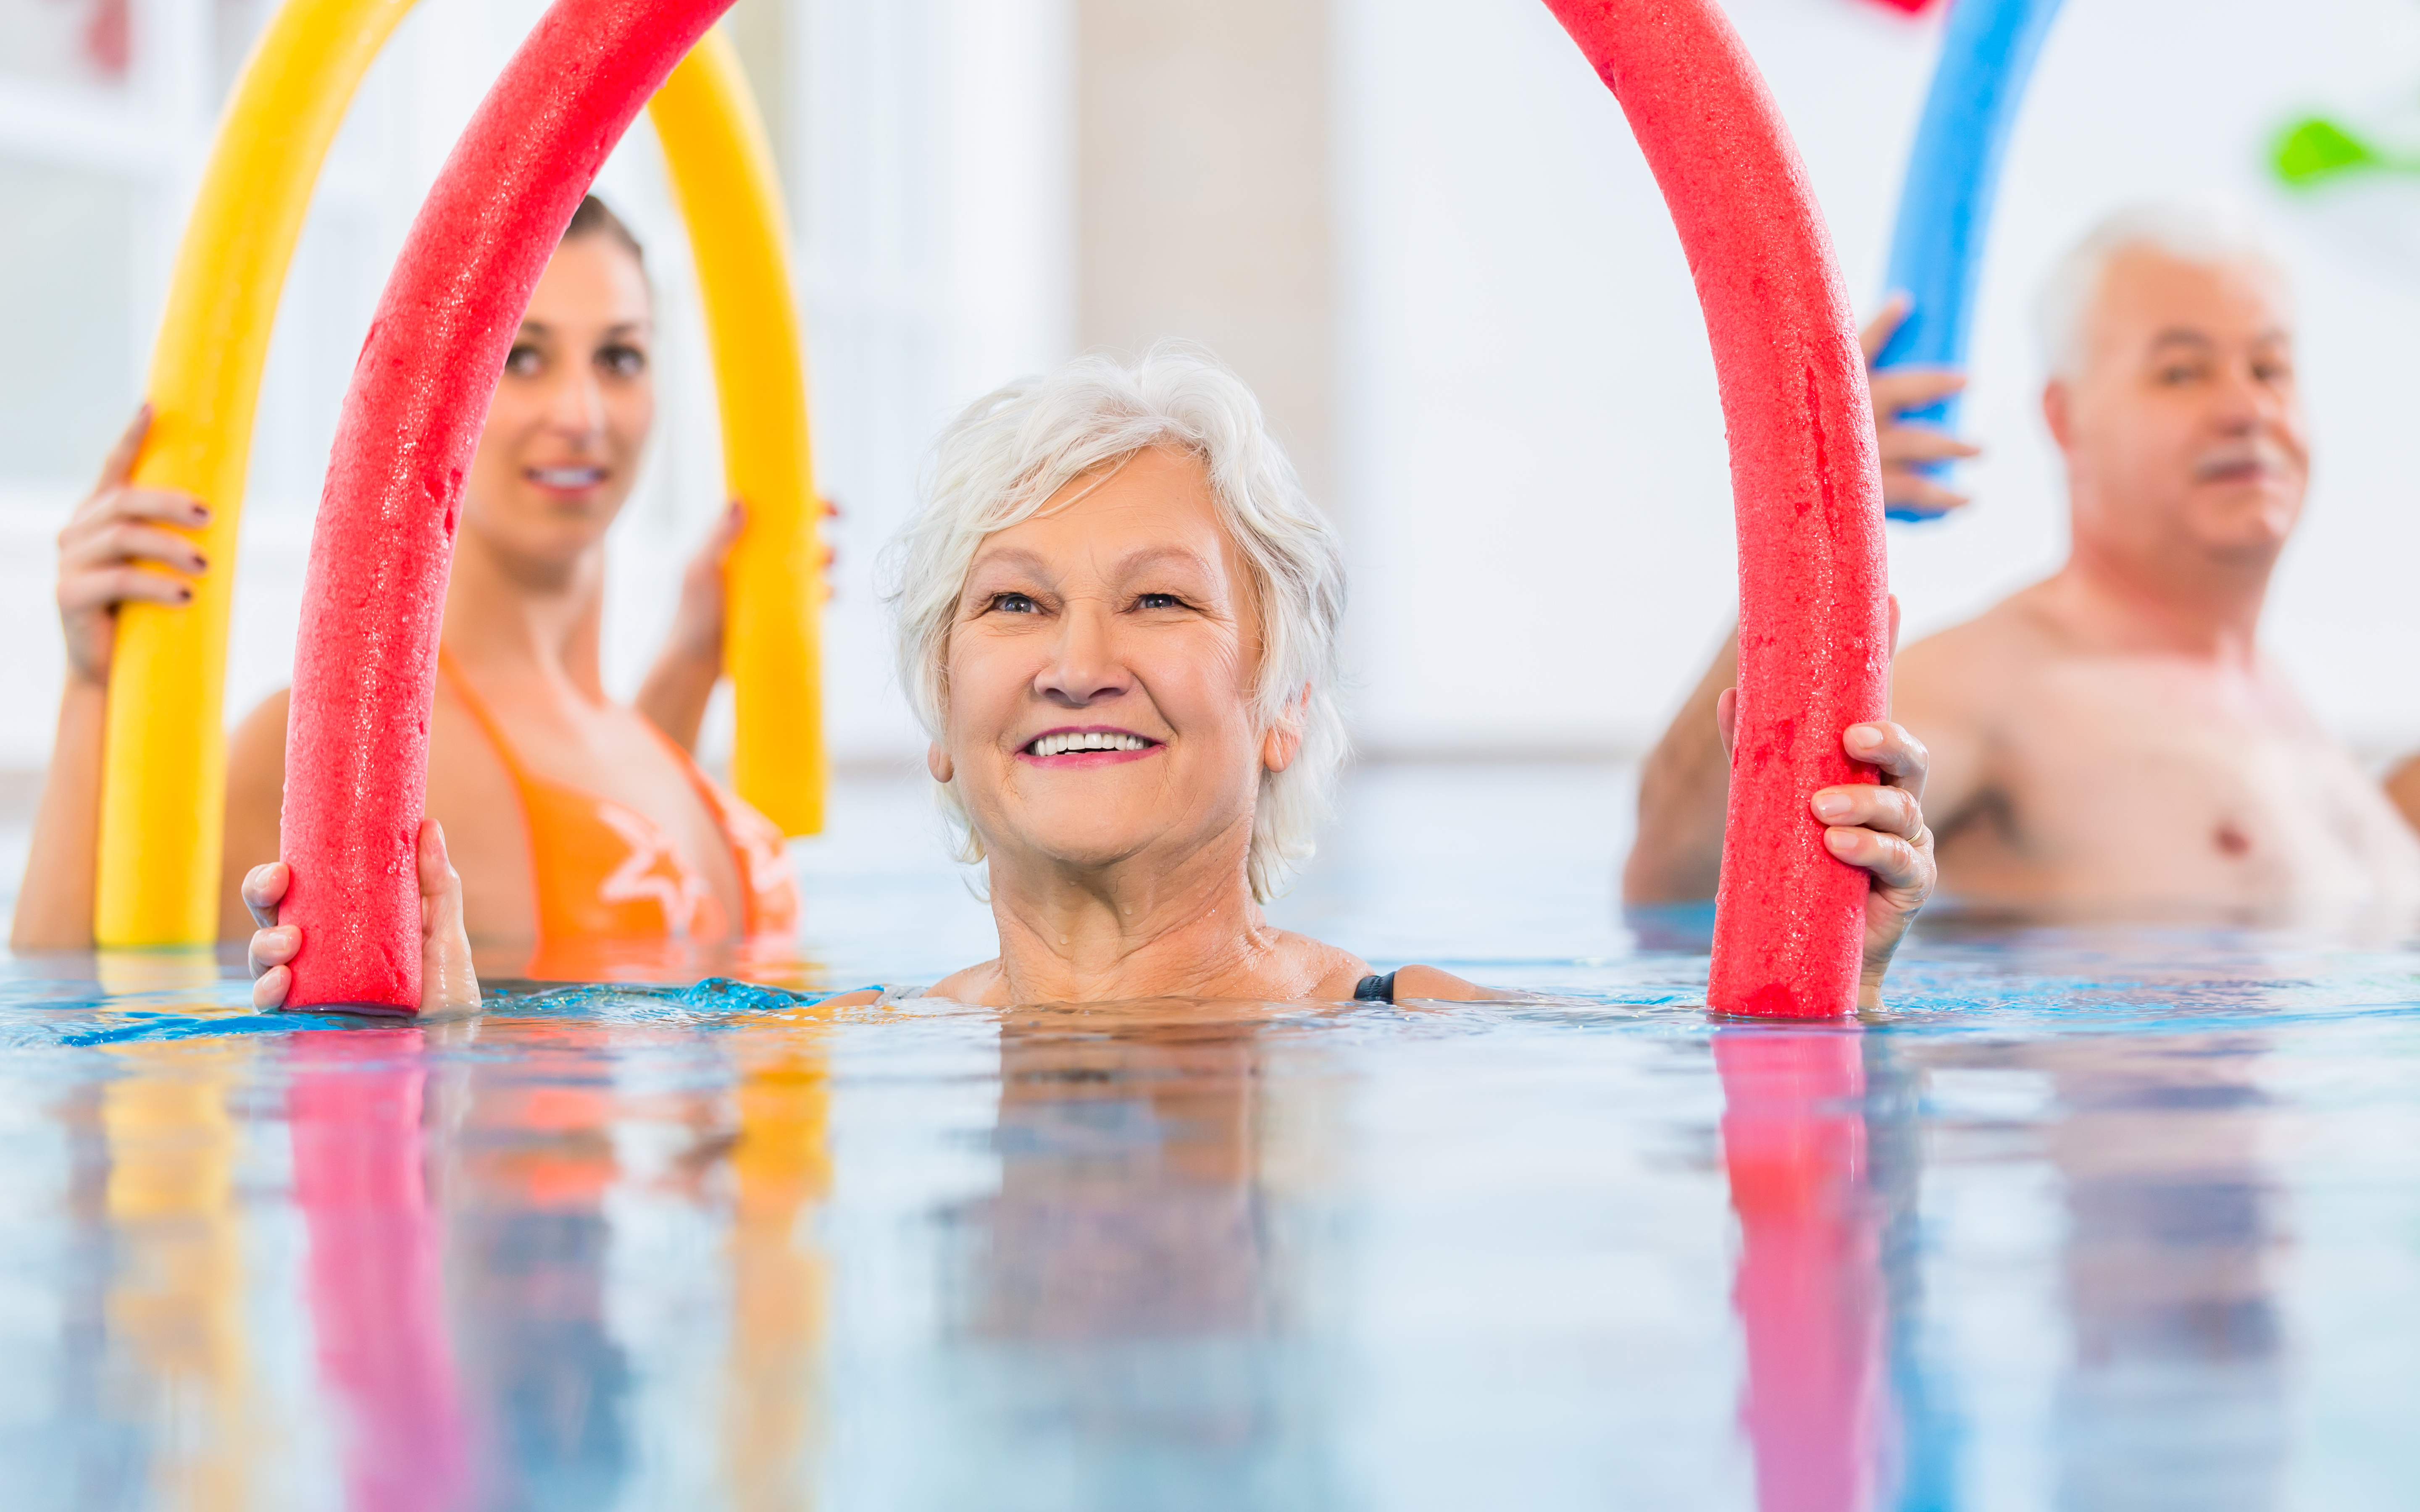 seniors using colorful pool noodles during a water exercise class